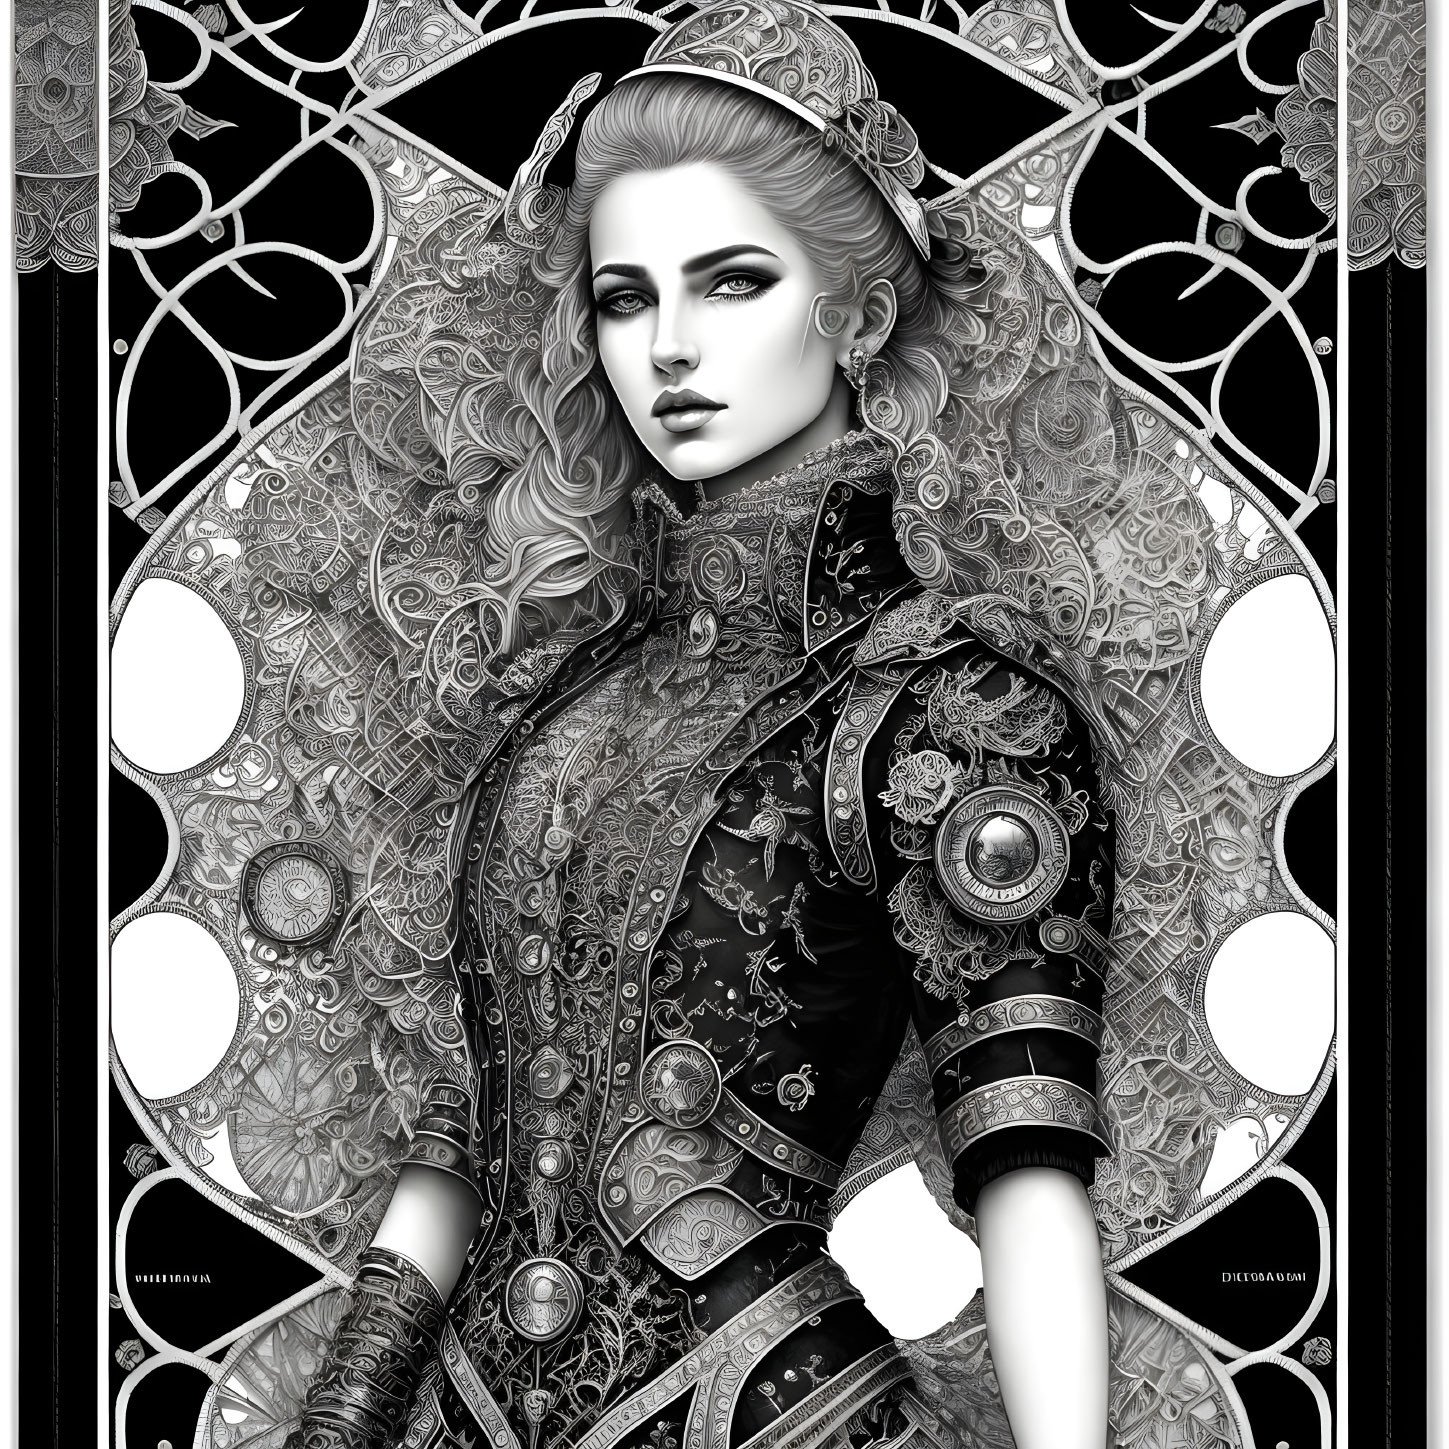 Monochrome artwork featuring woman in Victorian attire with lace patterns and geometric background